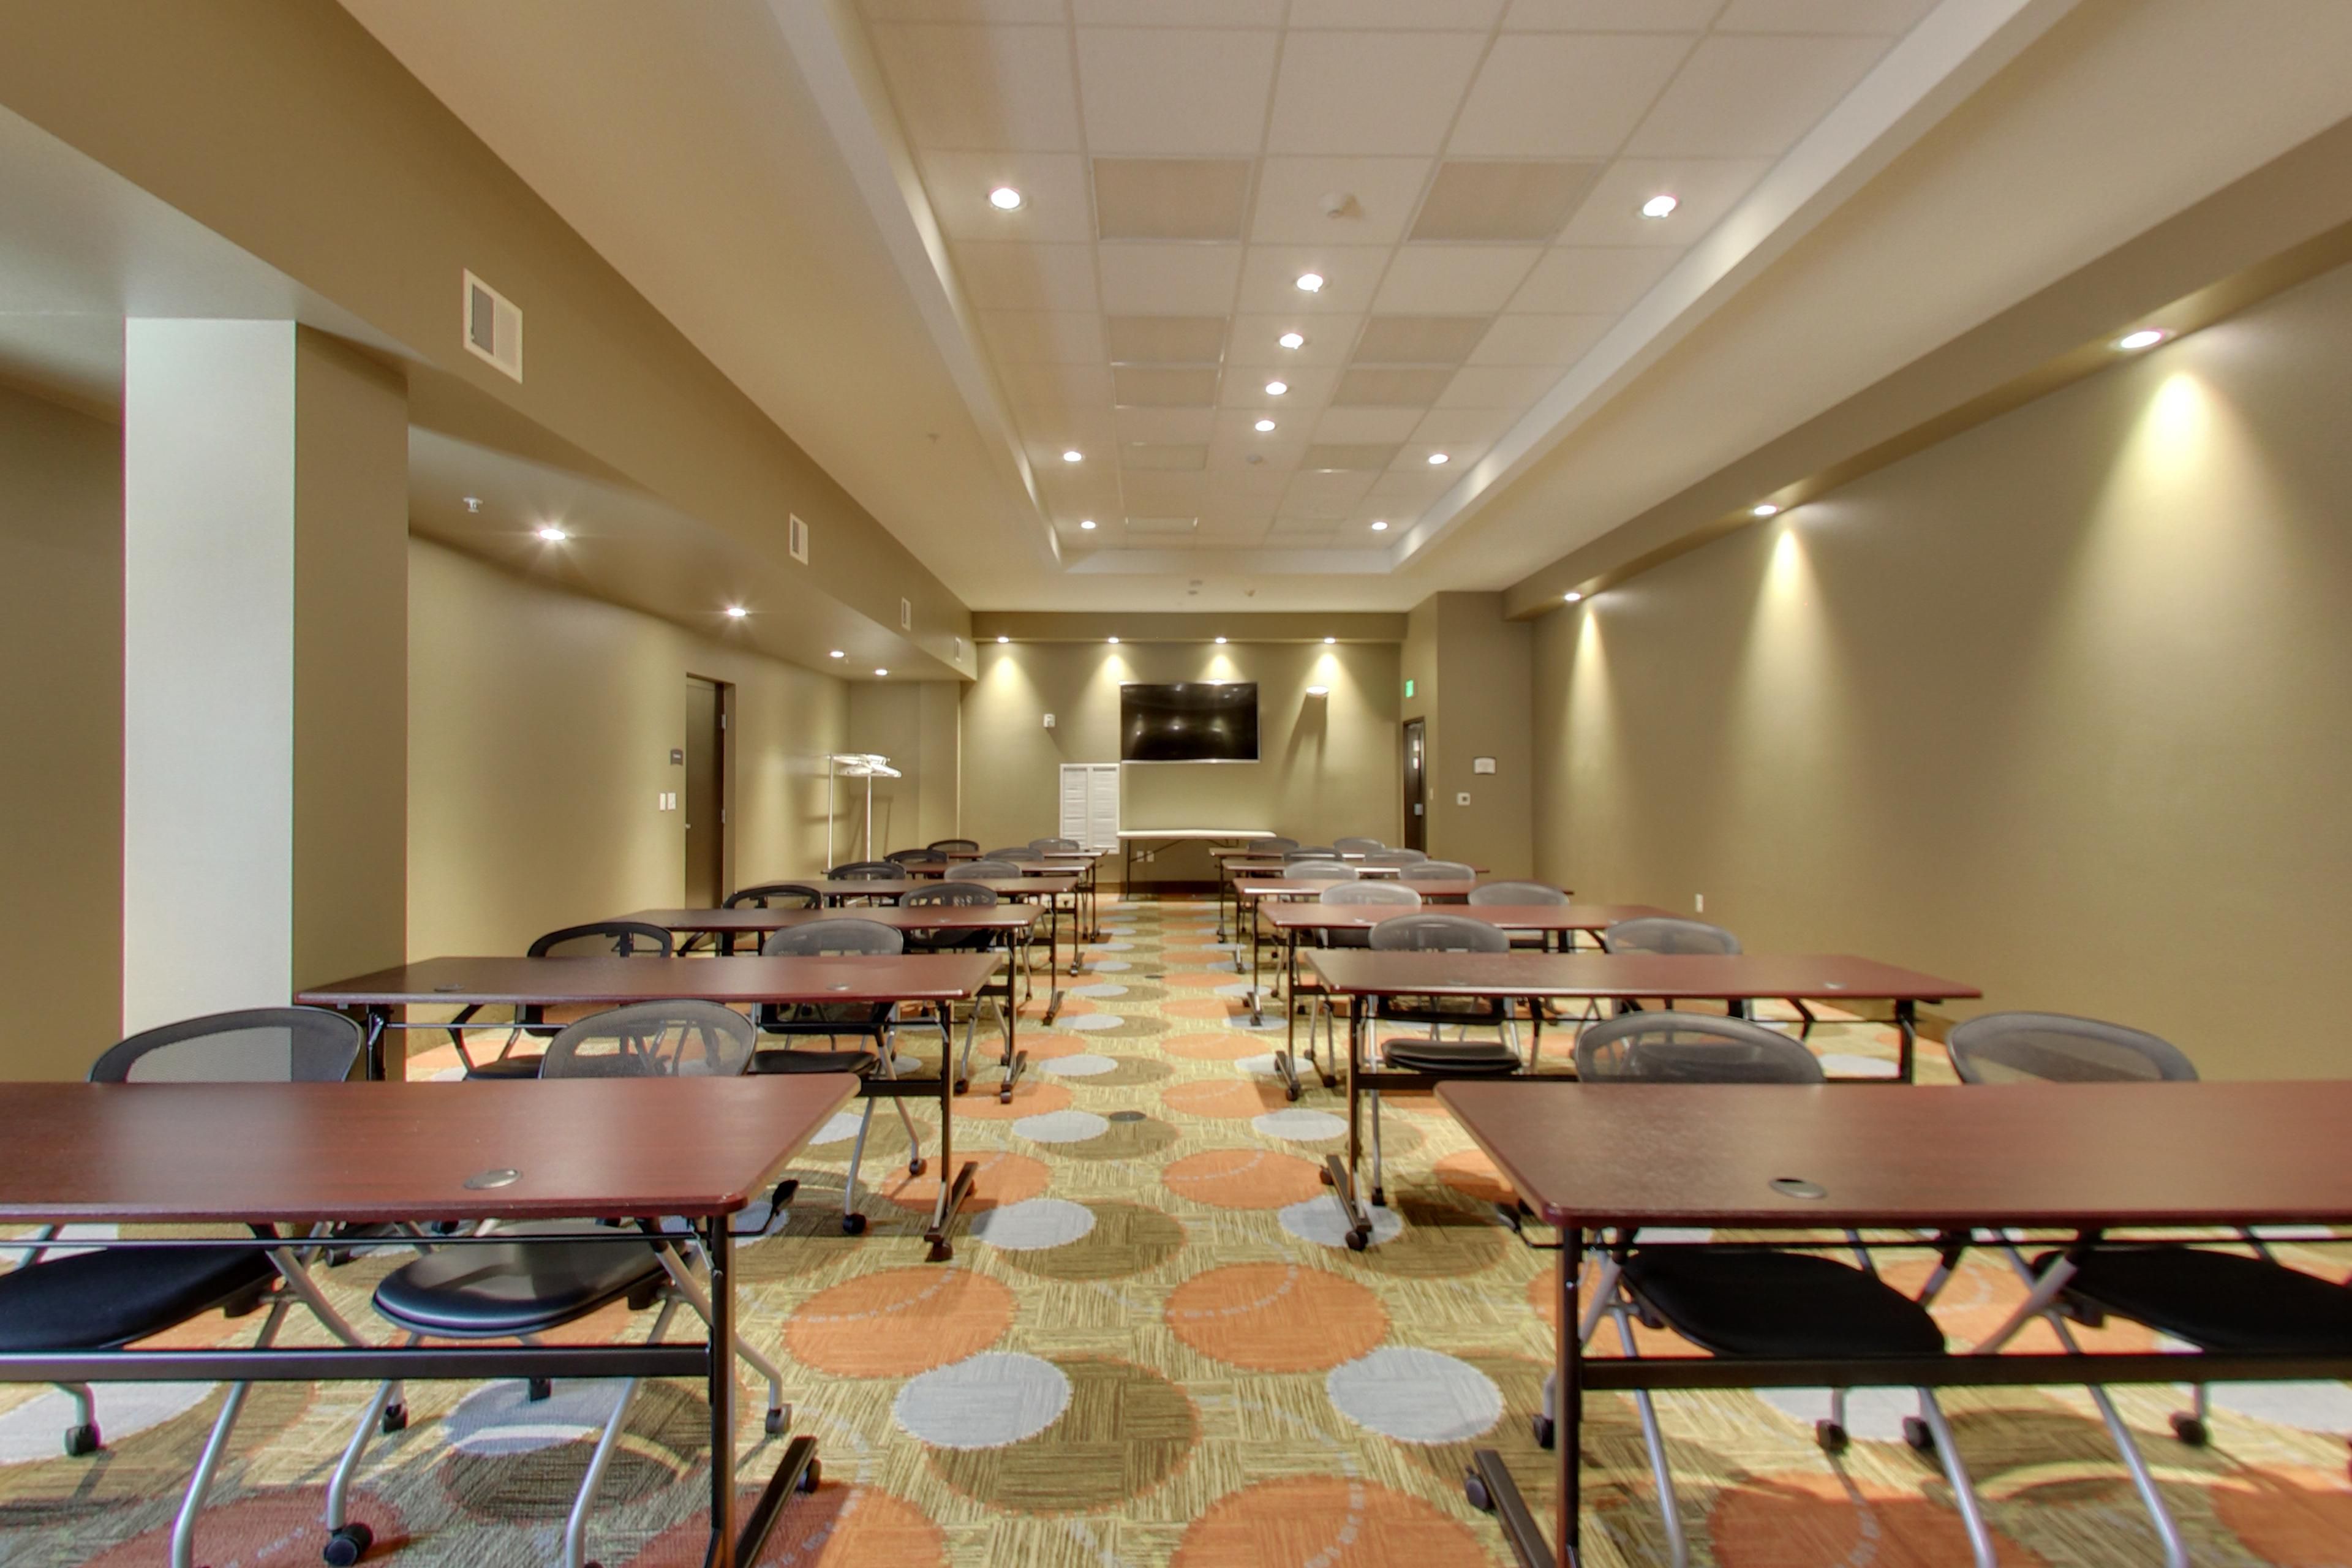 Our Hardrock Room fits up to 80 people while our smaller Nesbitt Room fits up to 20. Both rooms are located on the first floor with an array of seating arrangements available.